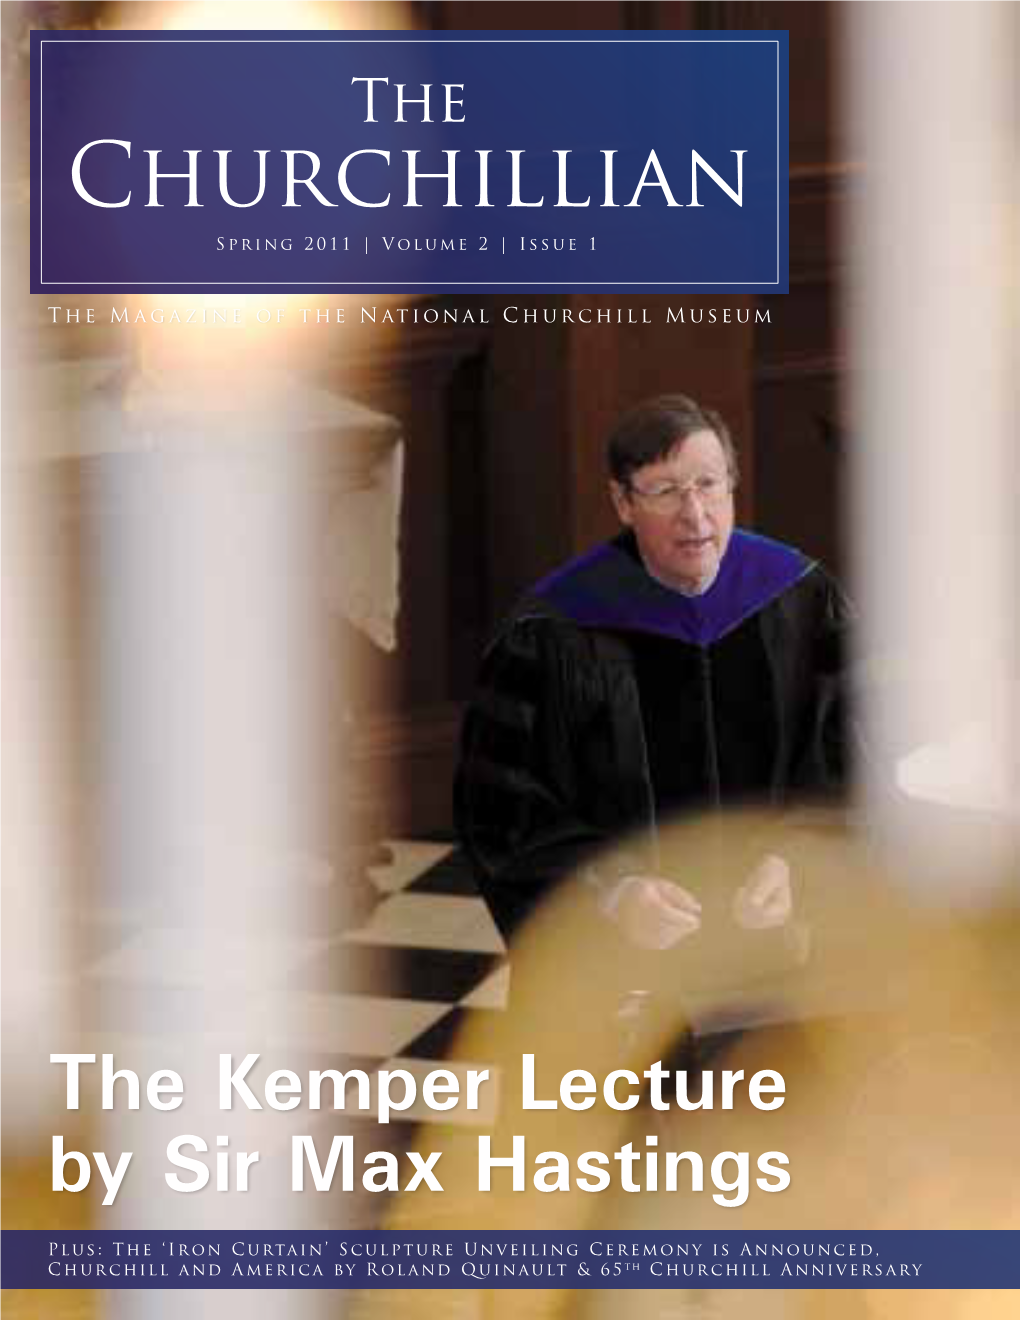 The Kemper Lecture by Sir Max Hastings